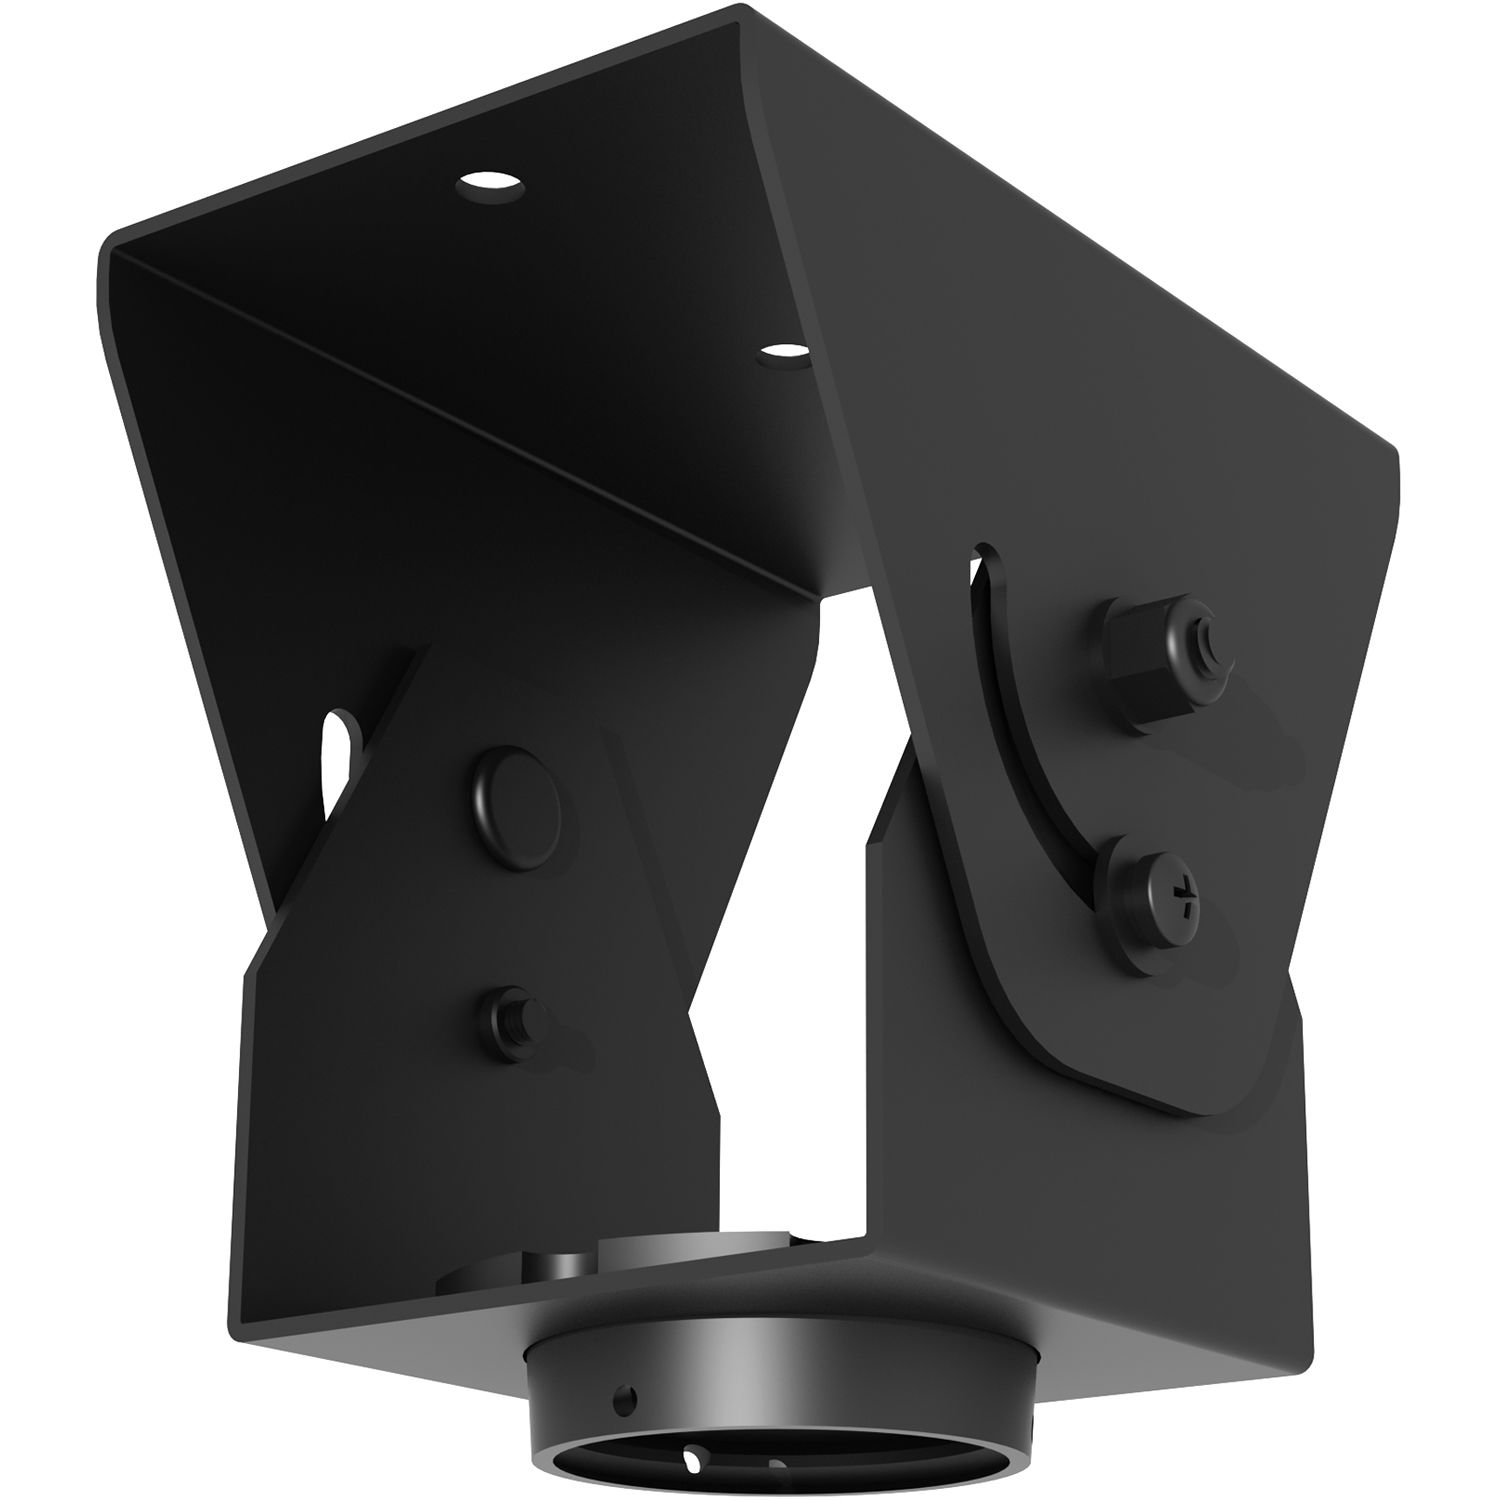 Peerless Av Cathedral Ceiling Adapter For Projectors Flat Panel Displays